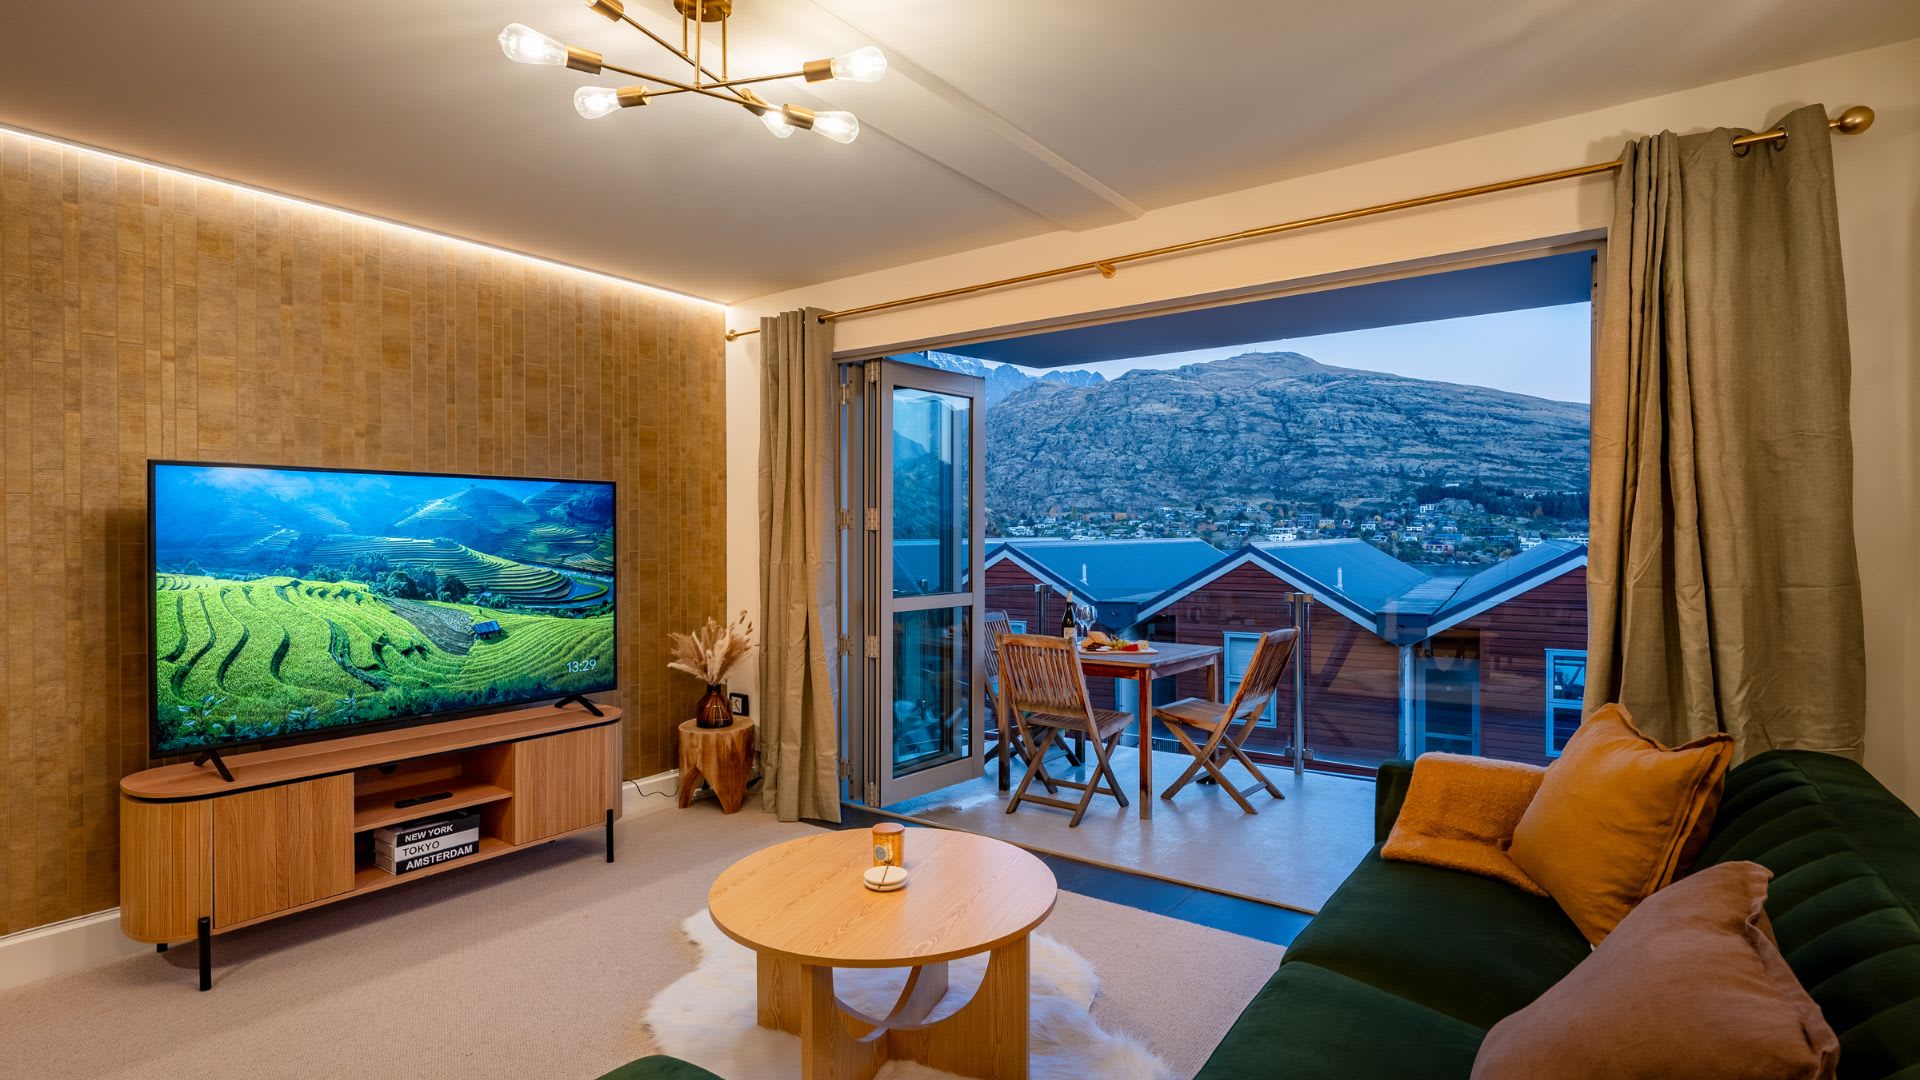 Stylish apartment living in luxury accommodation, Queenstown